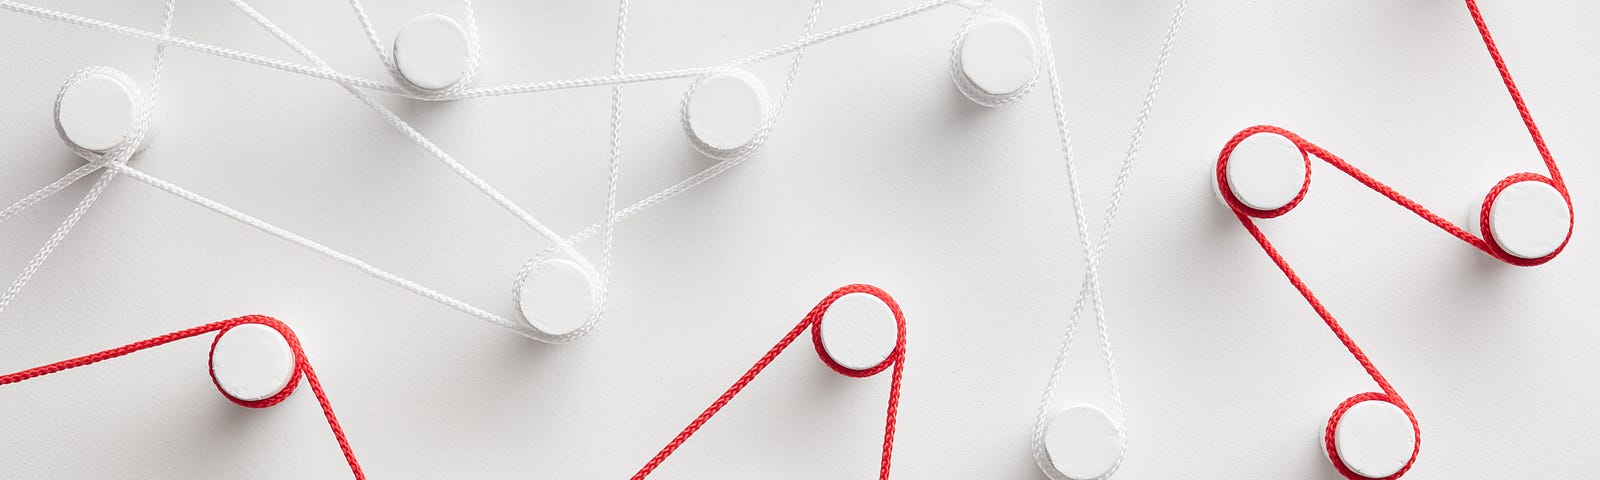 Close-up image of contrasting red and white strings strung between pegs over a white background.